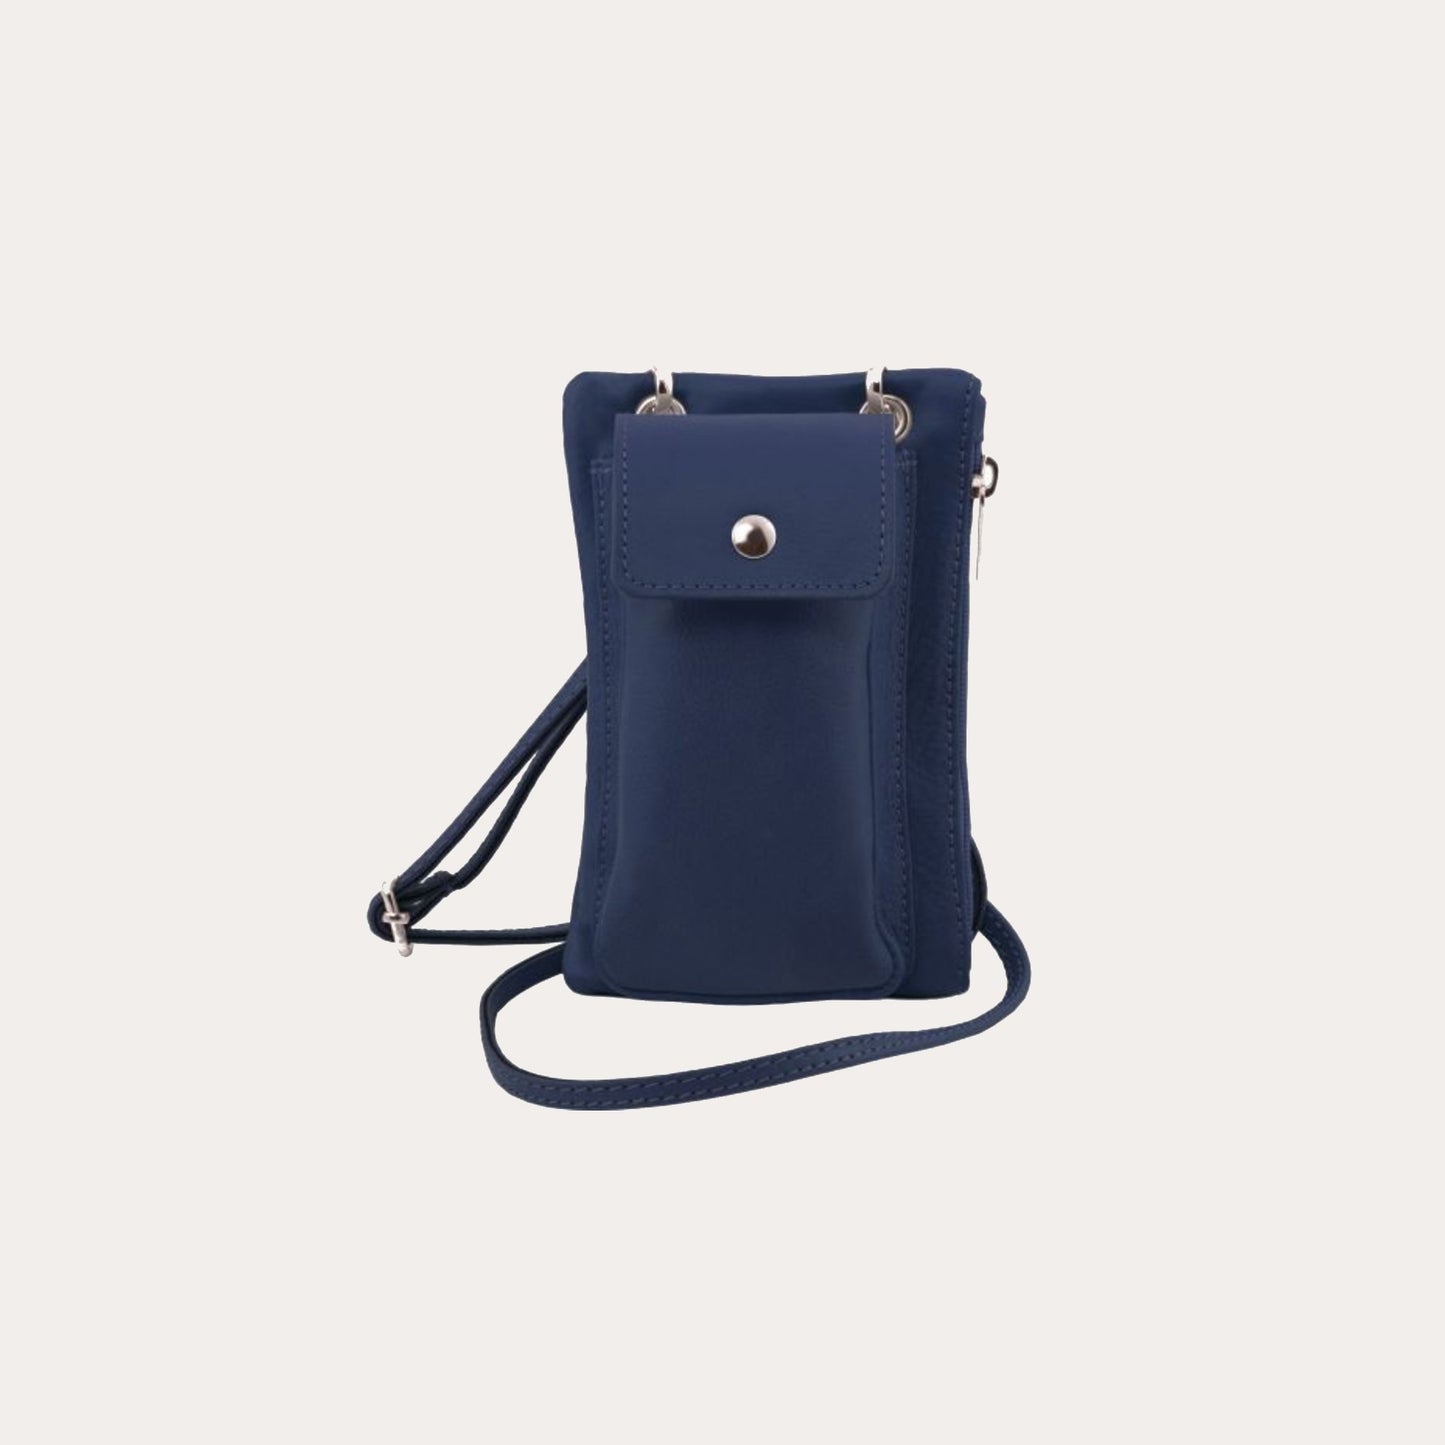 Tuscany Leather Navy Leather Cellphone Holder Mini Cross Bag